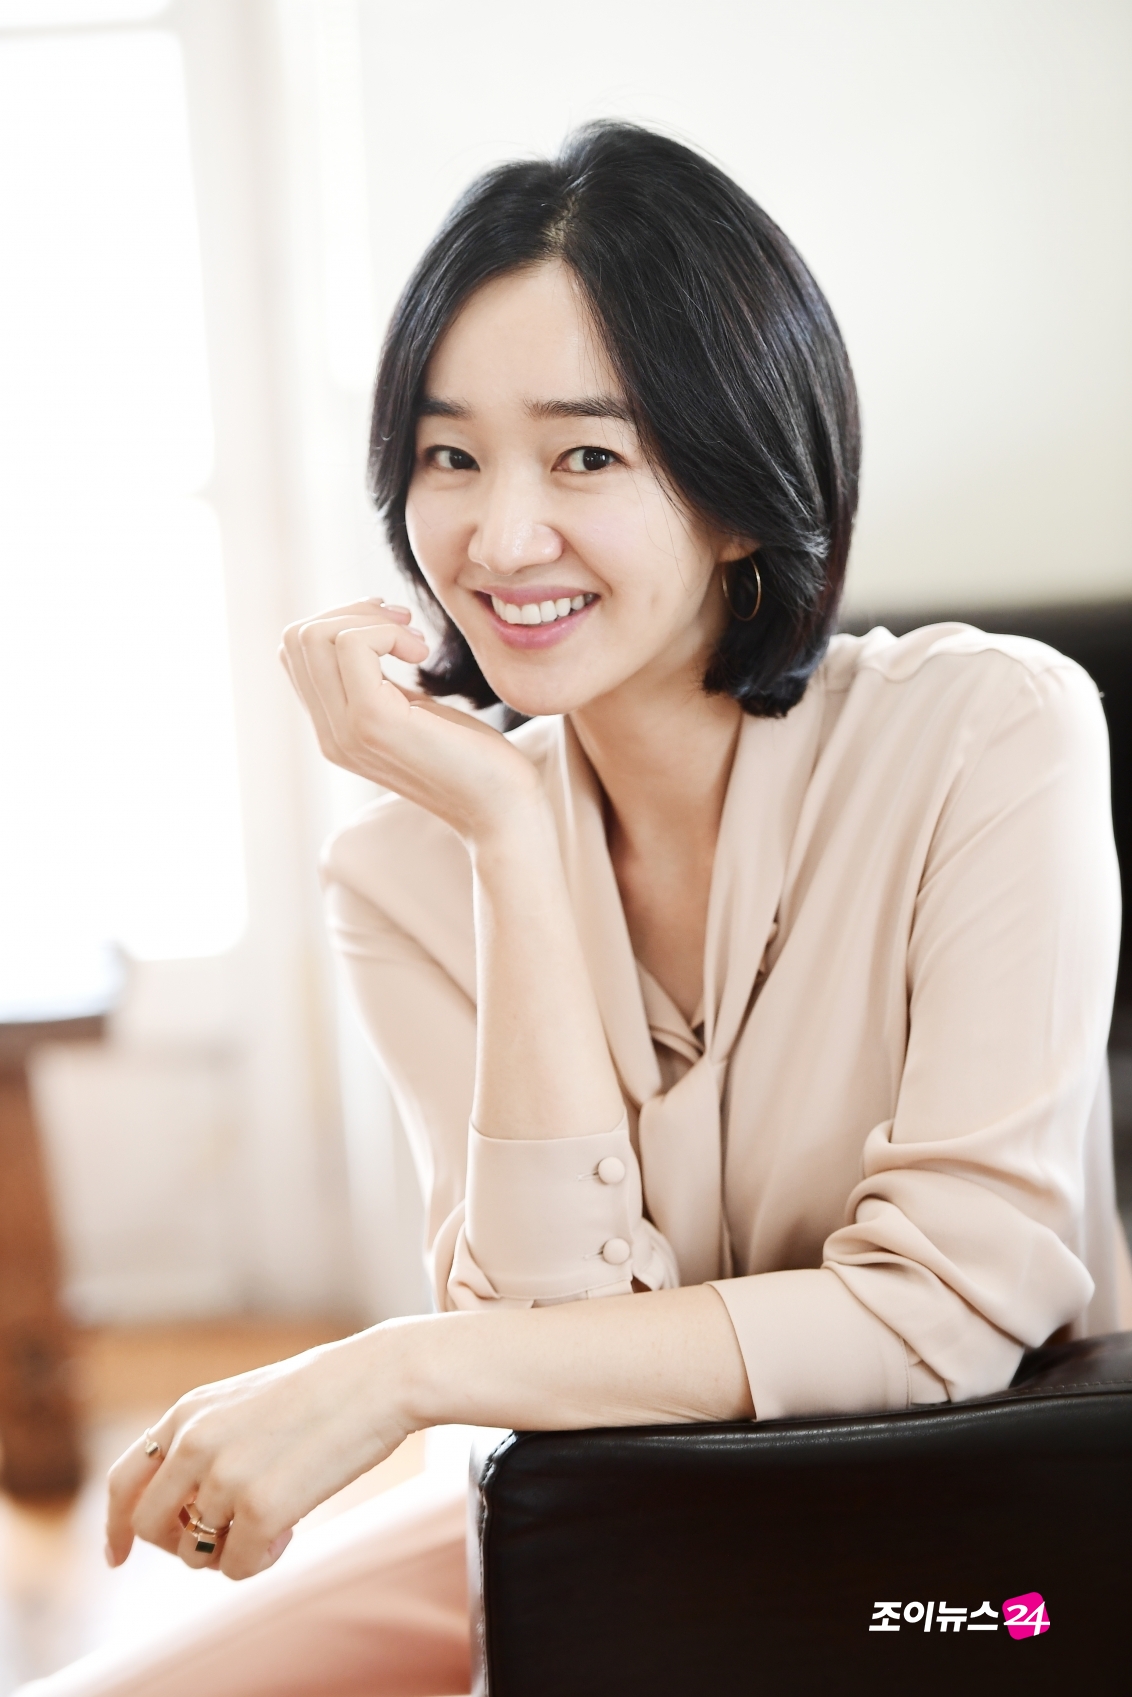 Actor Soo Ae of the movie High Society poses in an interview with him.Soo Ae played the role of Oh Soo-yeon, deputy director of the museum, who does not choose means and methods for his ambition to enter the High Society in High Society (director transformation).The release will be on the 29th.